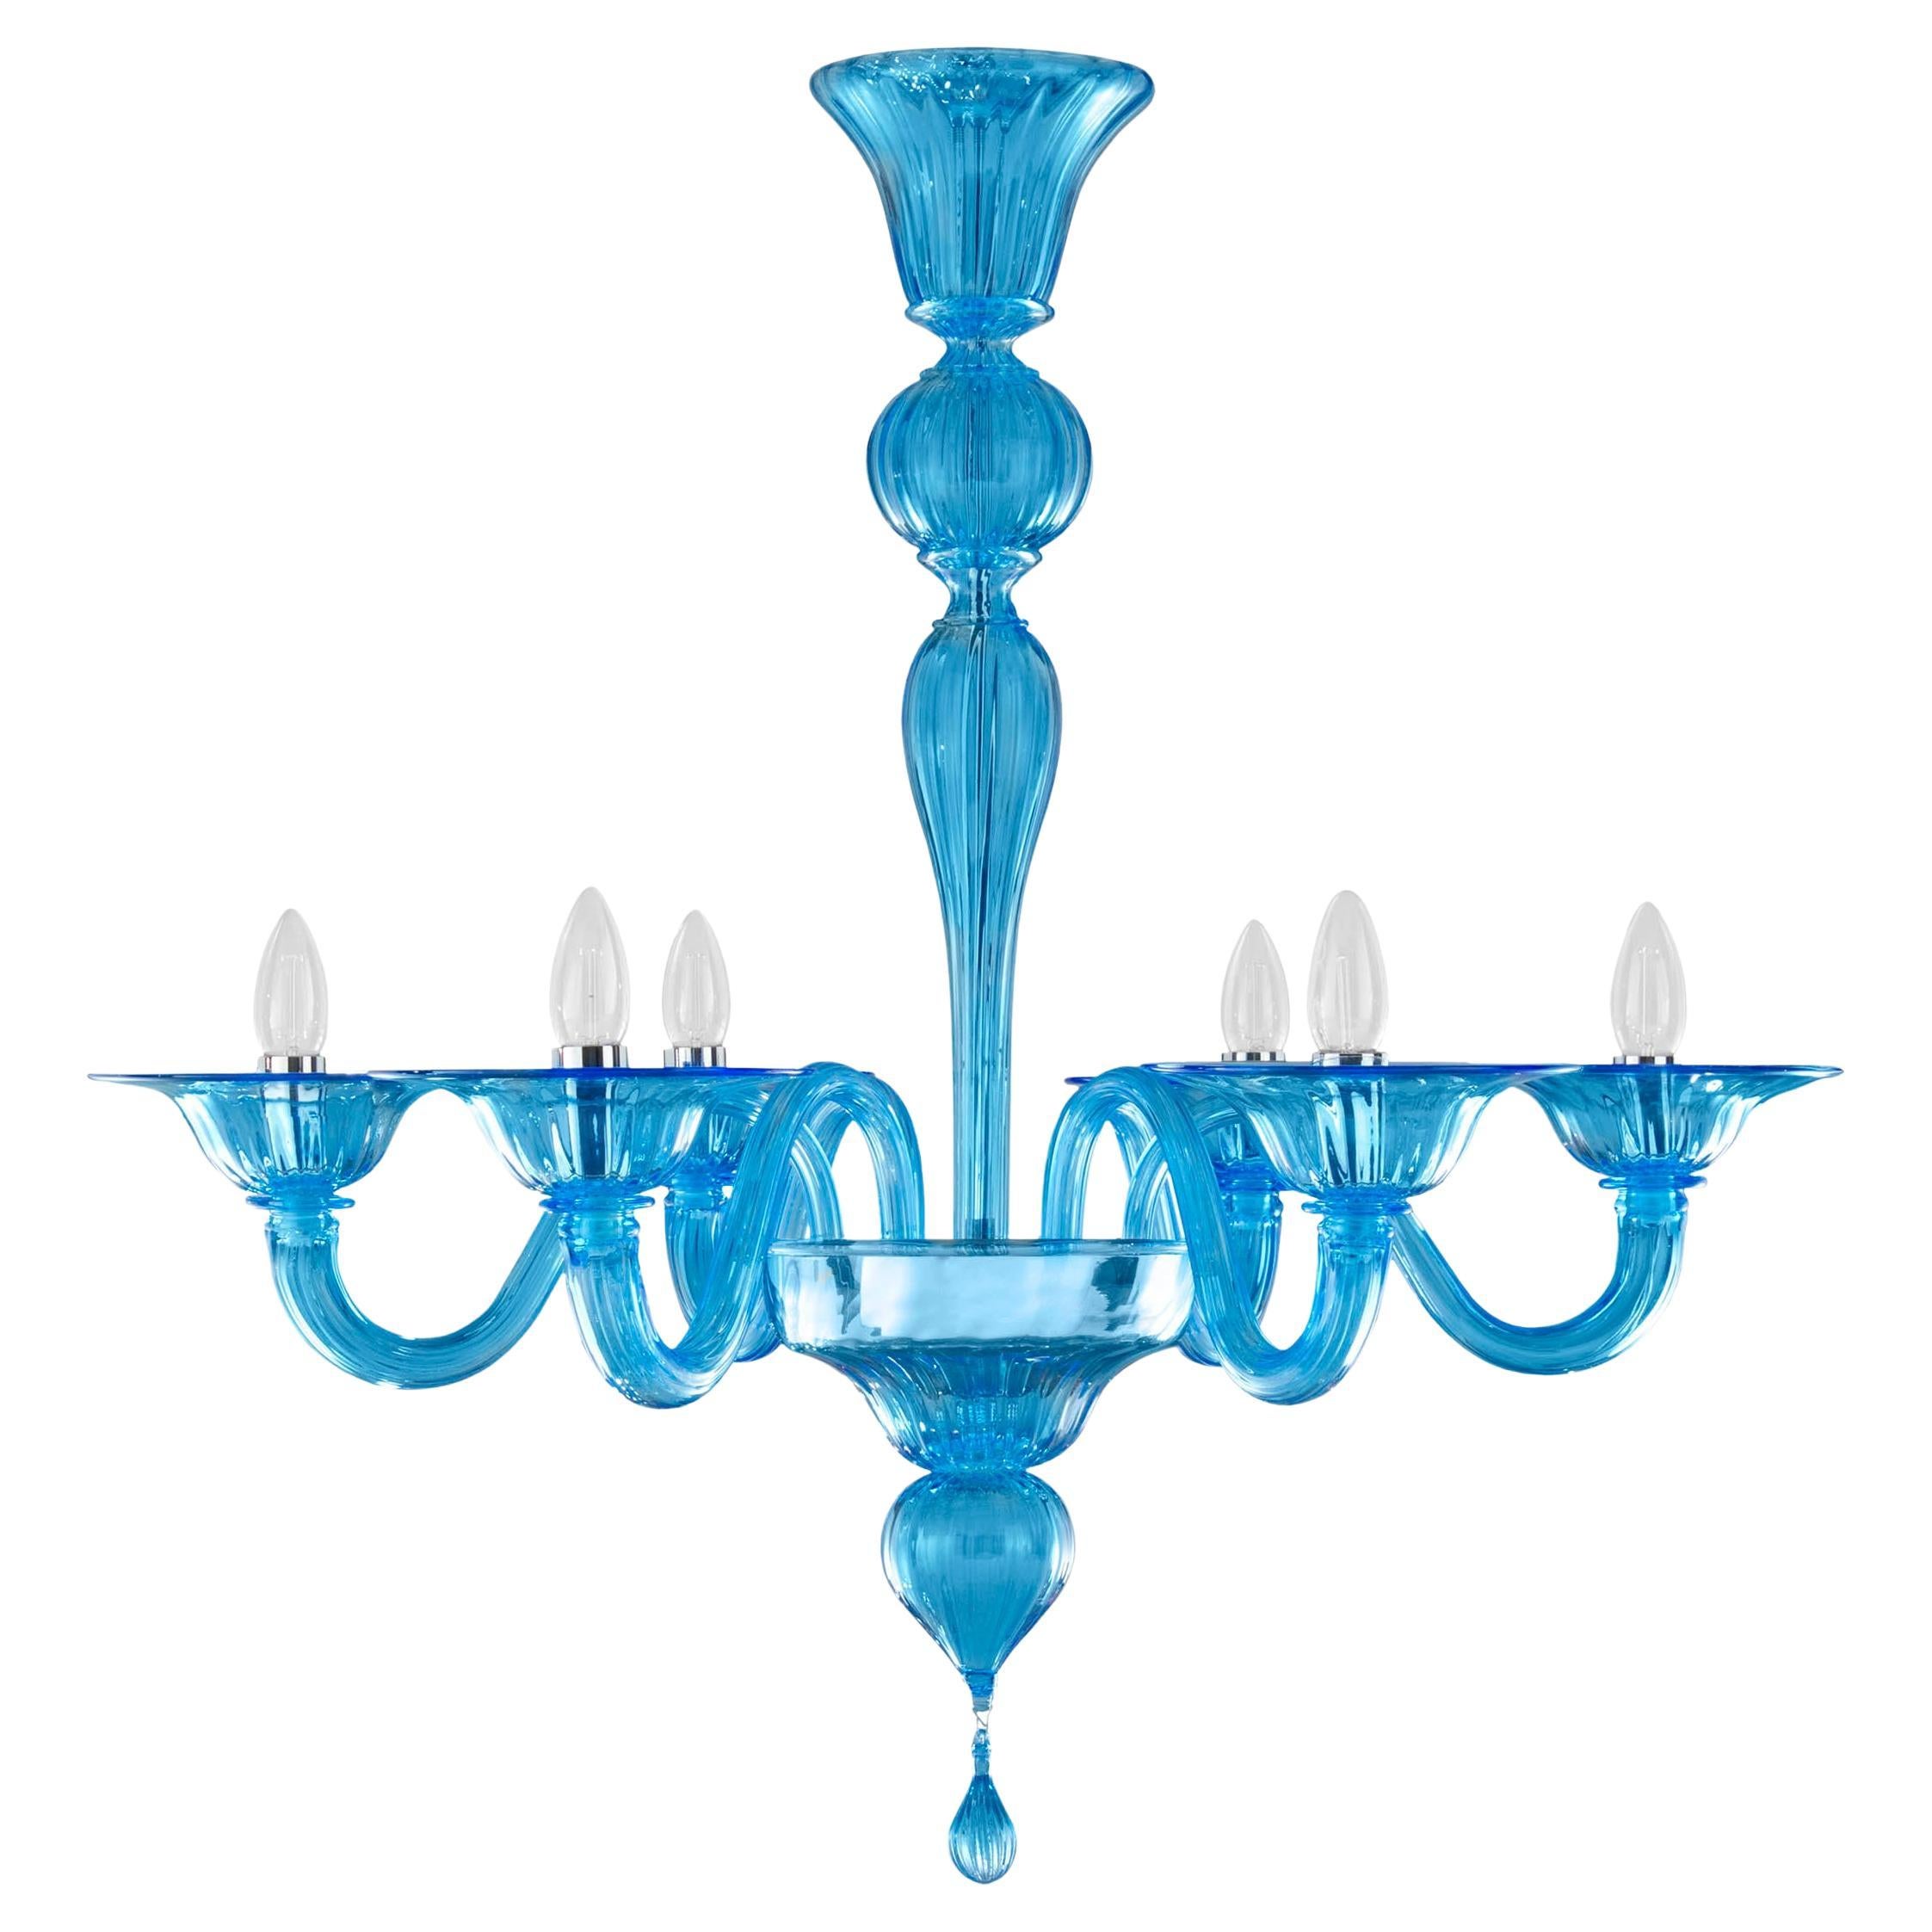 21st Century Chandelier, 6 Arms Ocean Blue Murano Glass by Multiforme